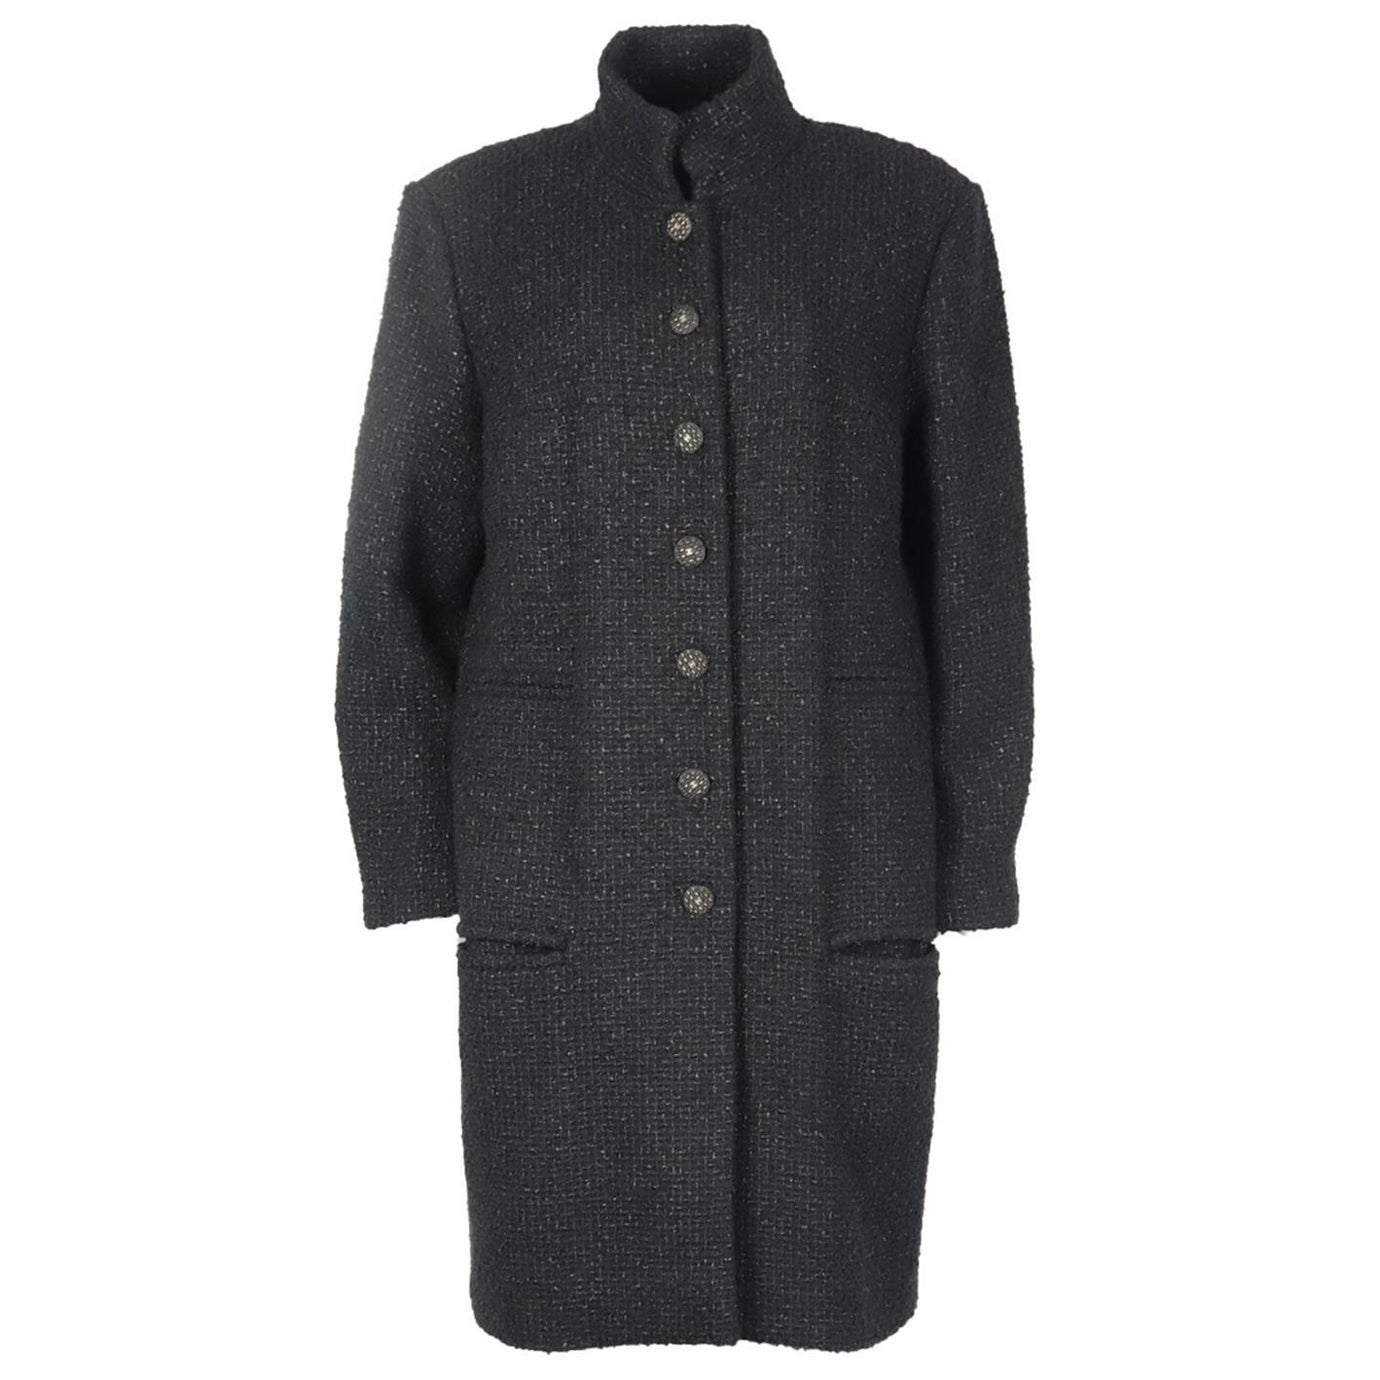 Chanel 2018 Cotton And Wool Blend Tweed Coat Fr 50 Uk 22